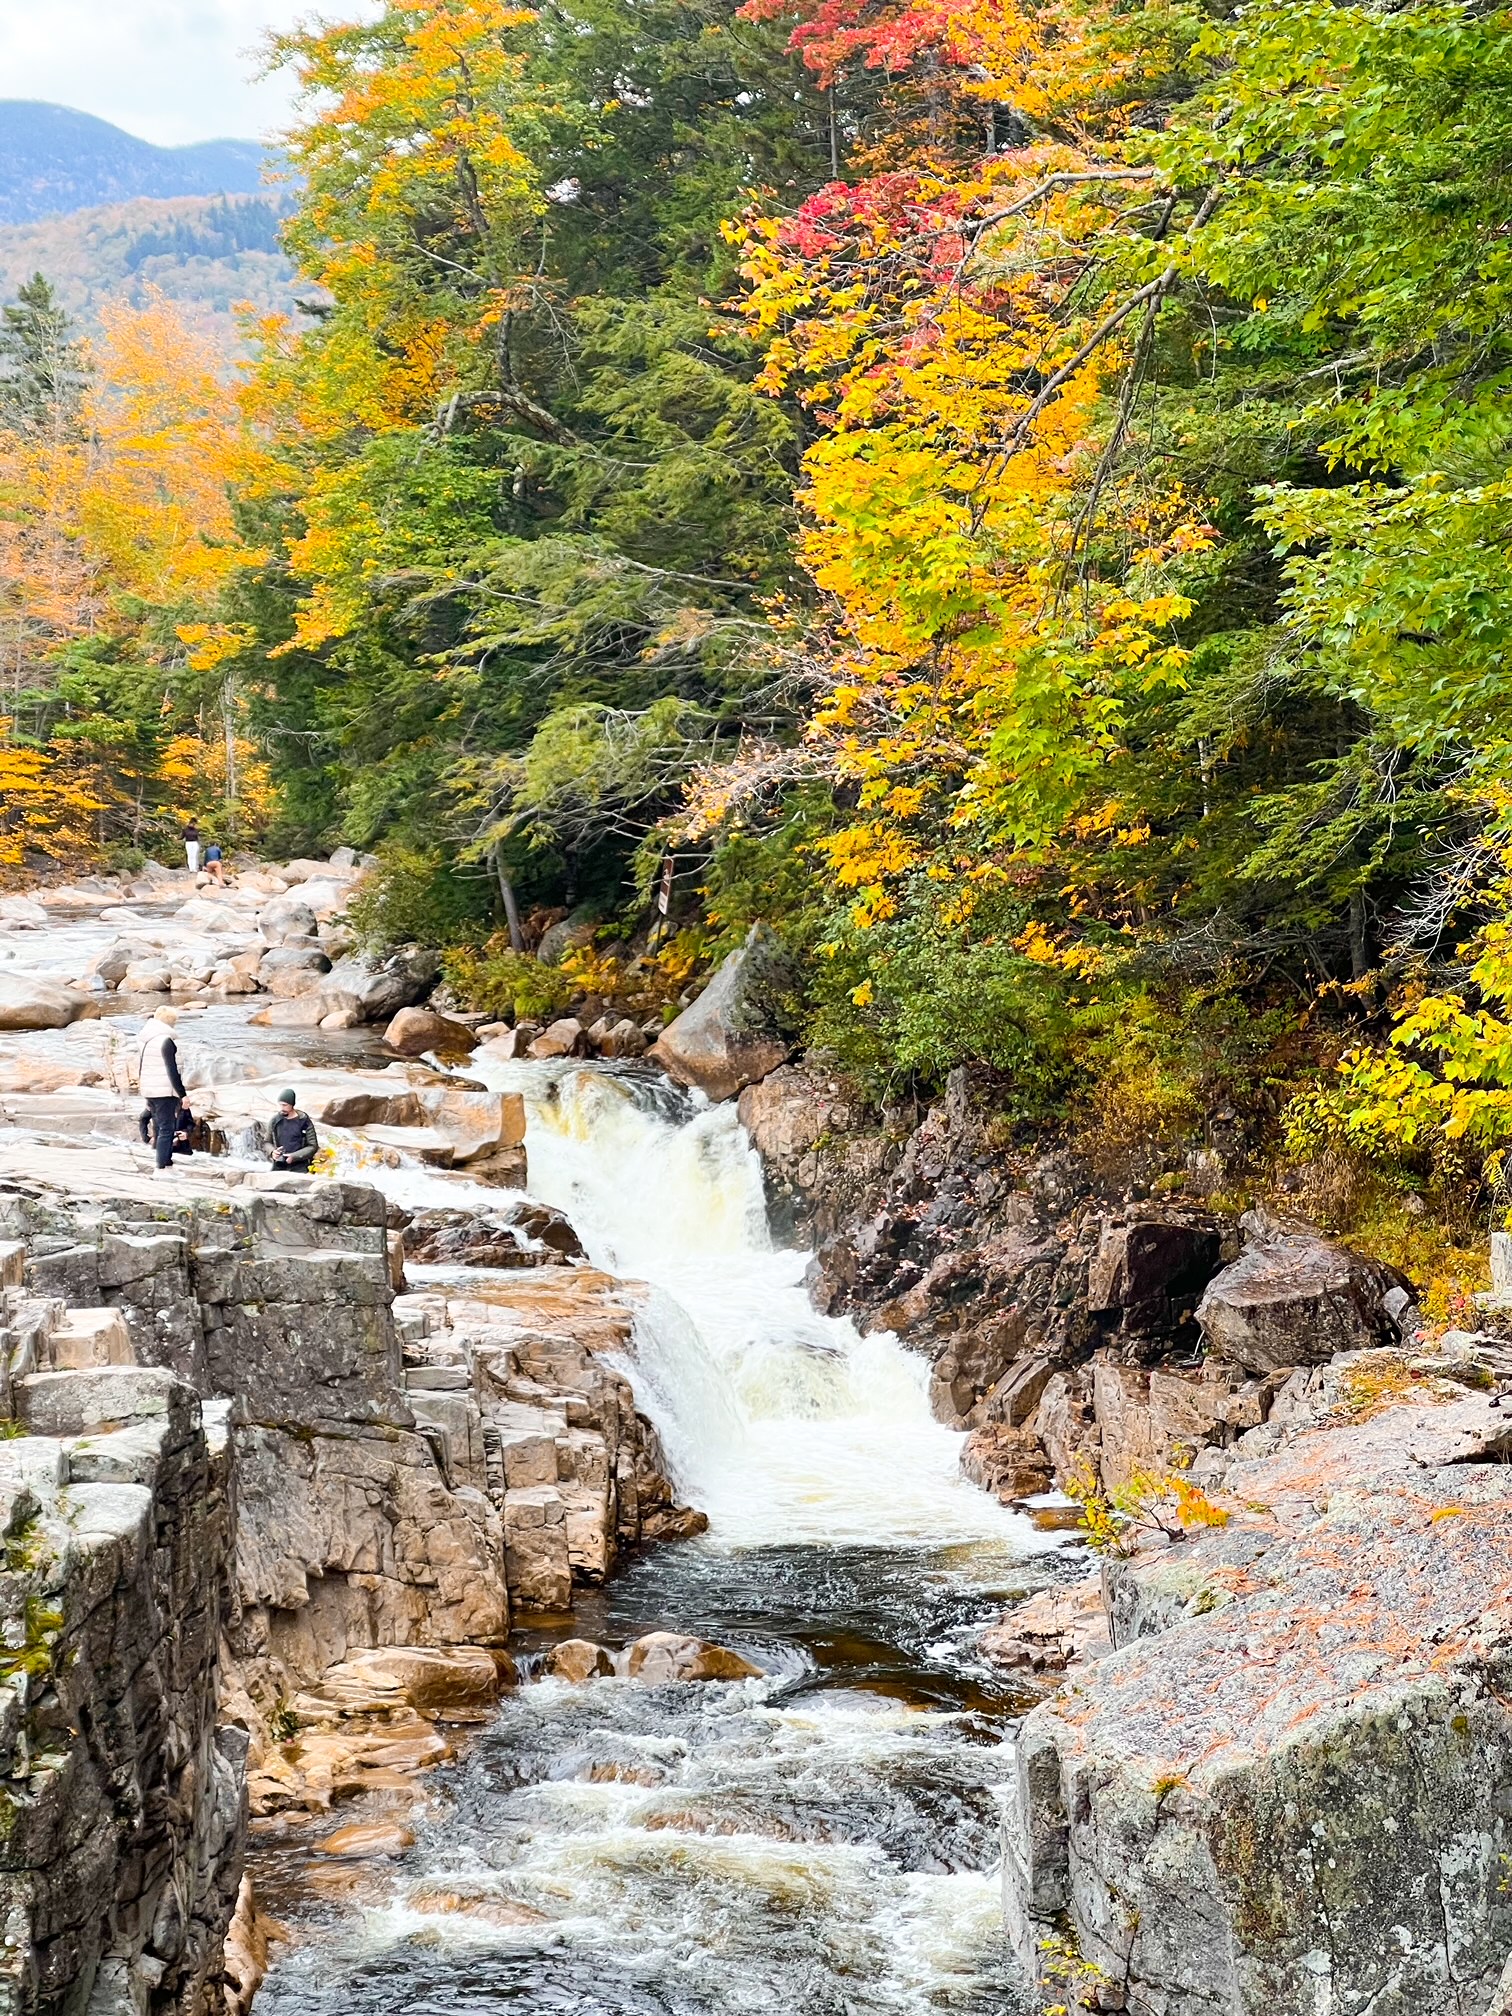 A small waterfall cascades down stone rocks as people climb by it and the green leaves slowly turn red and yellow. 